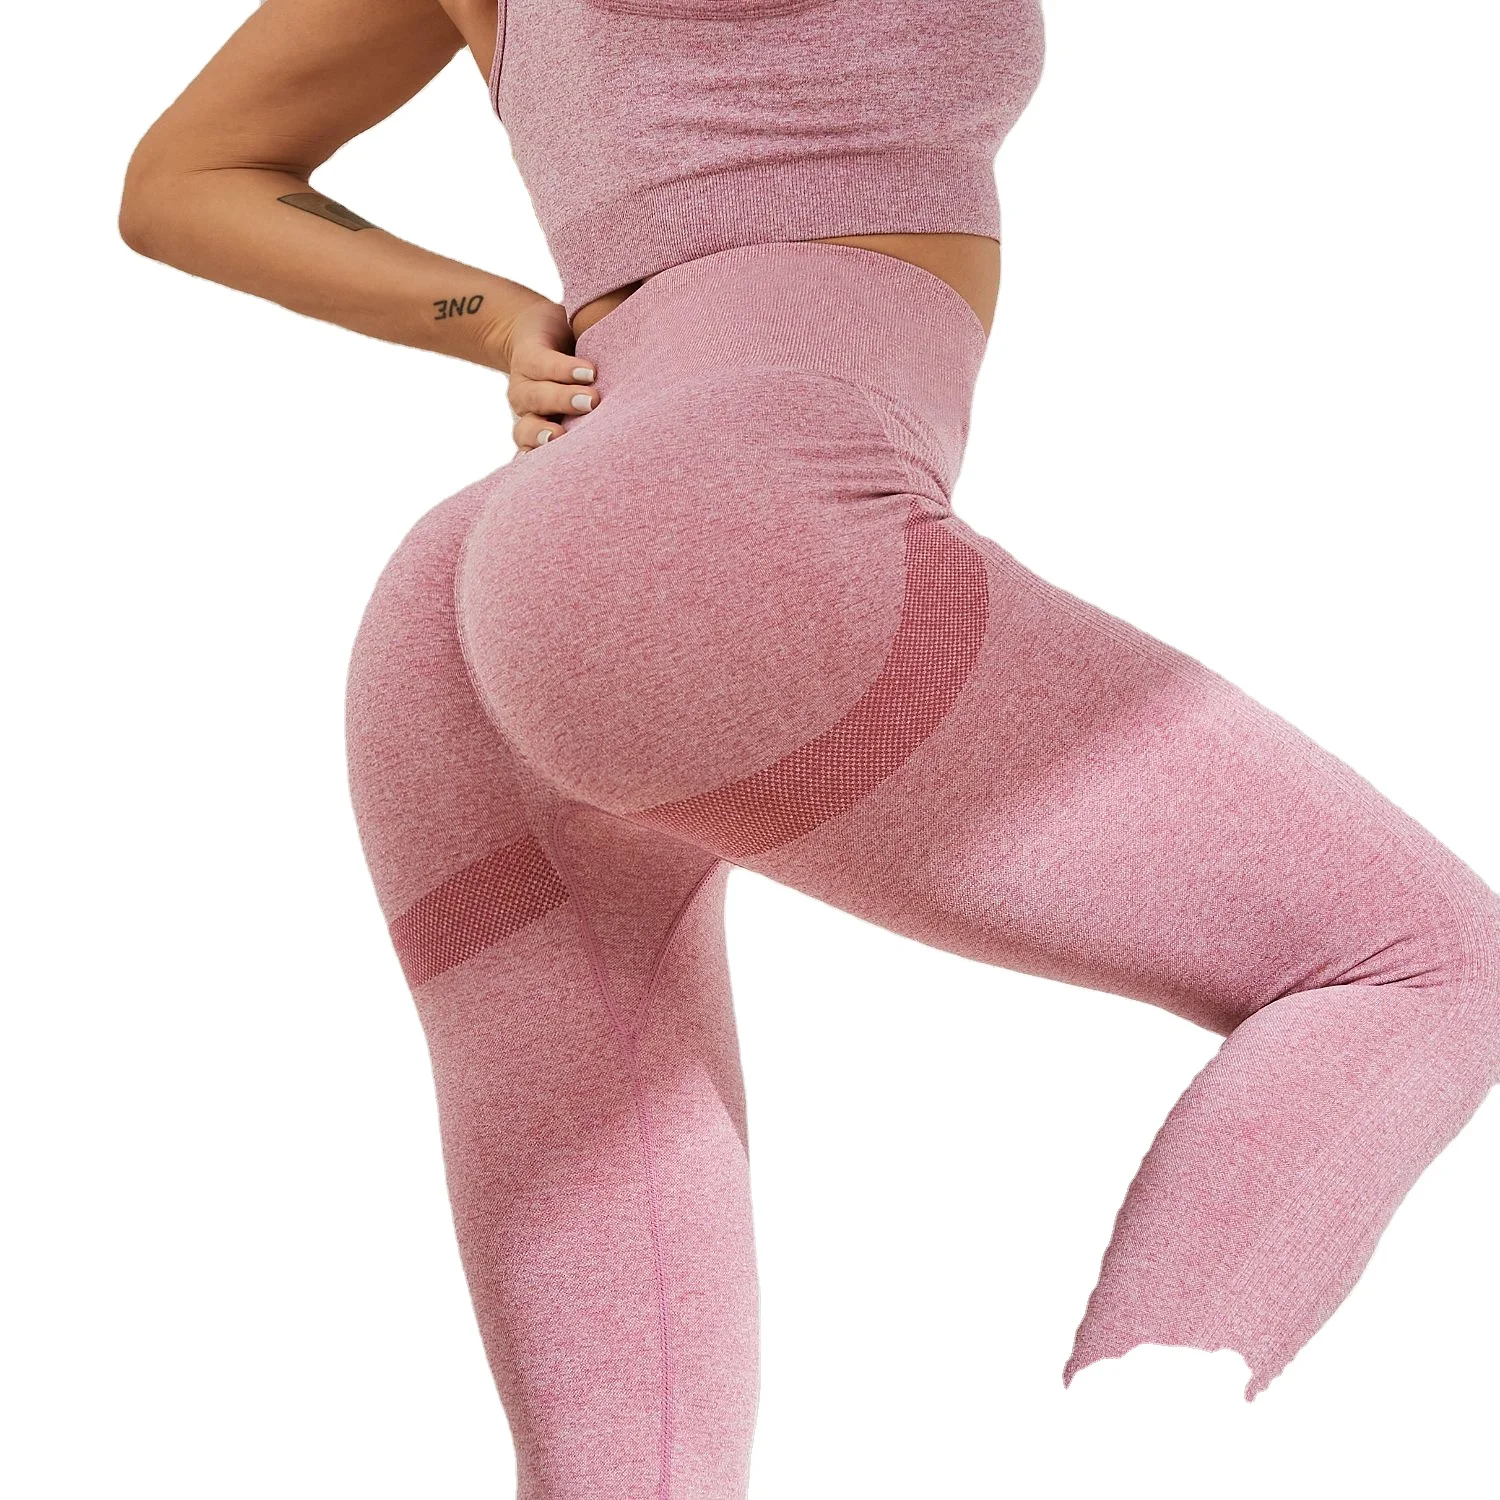 

Good Quality Sexx Rsa Pts Pants Sports Suit Ms4 Leggins Gym Wear Clothing Gleemerz Workout, Picture shows